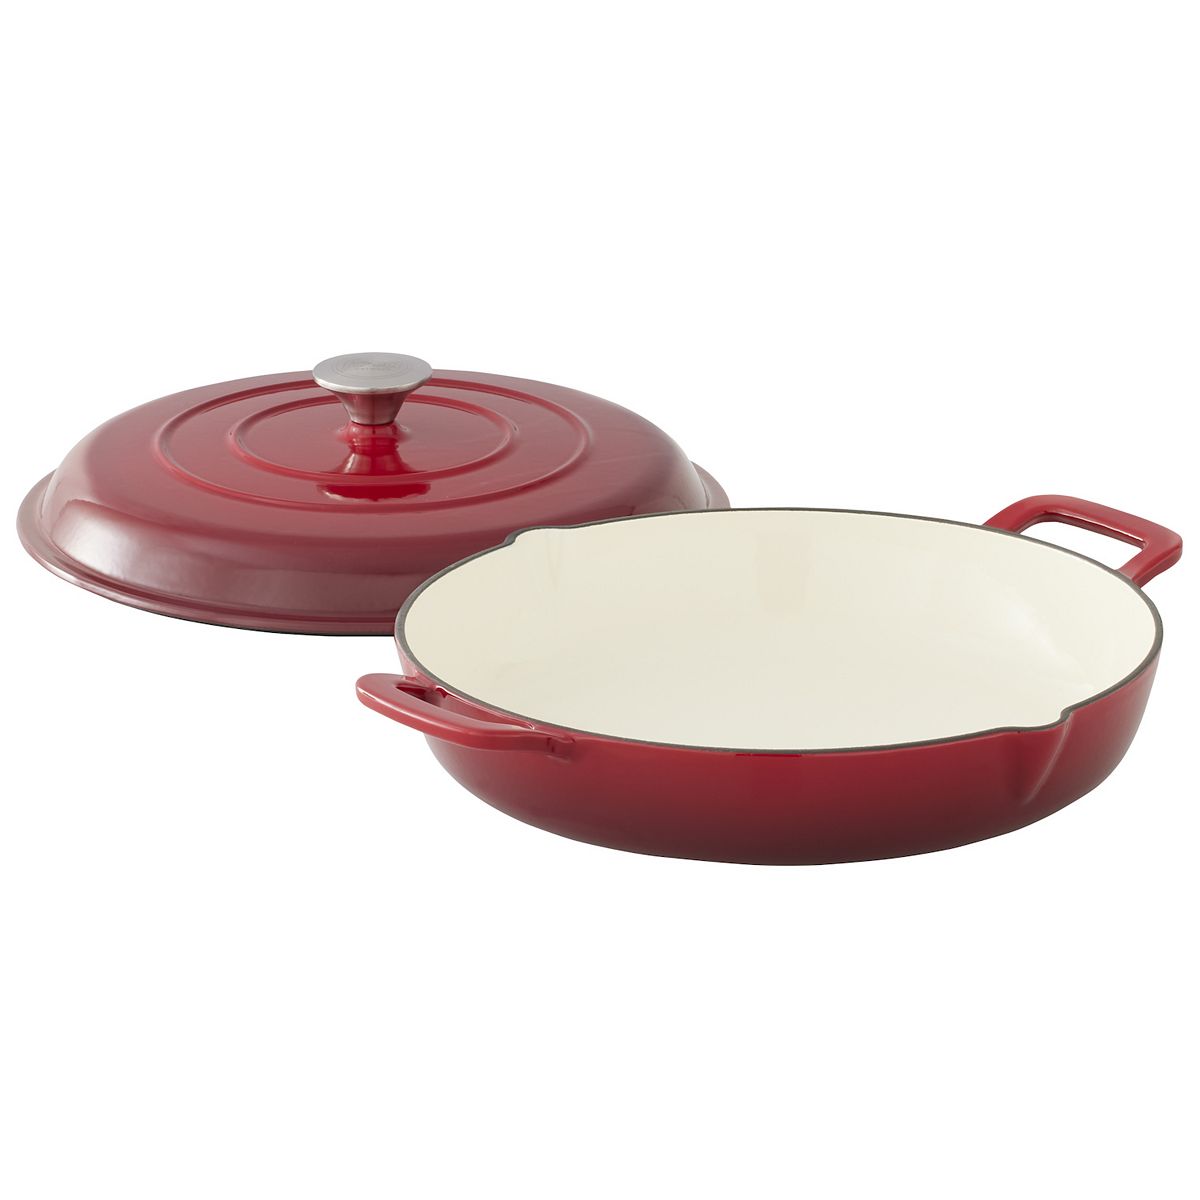 Food Network™ 3.5-qt. Enameled Cast-Iron Braiser with Lid
